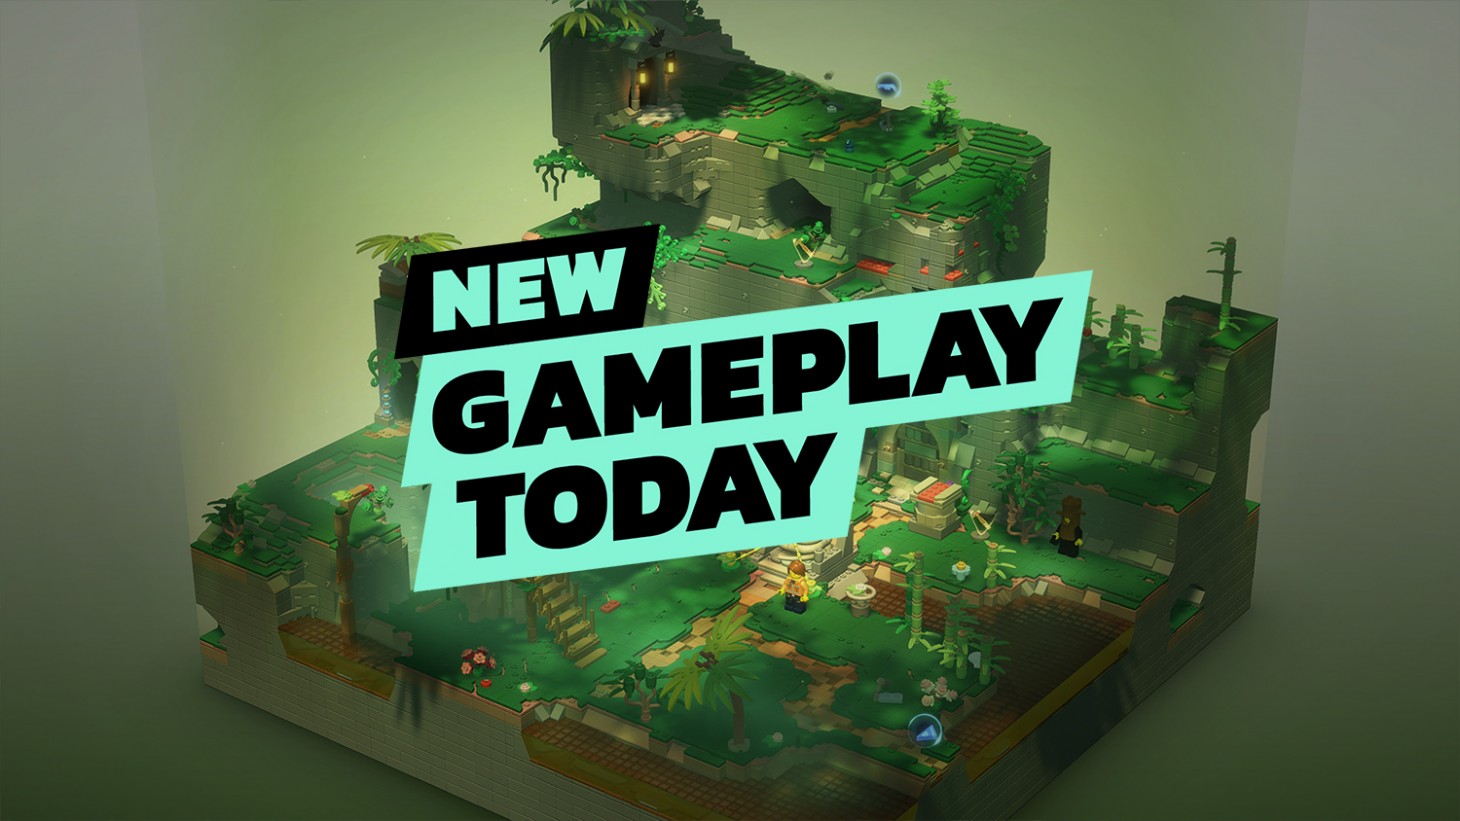 LEGO Bricktales new gameplay today